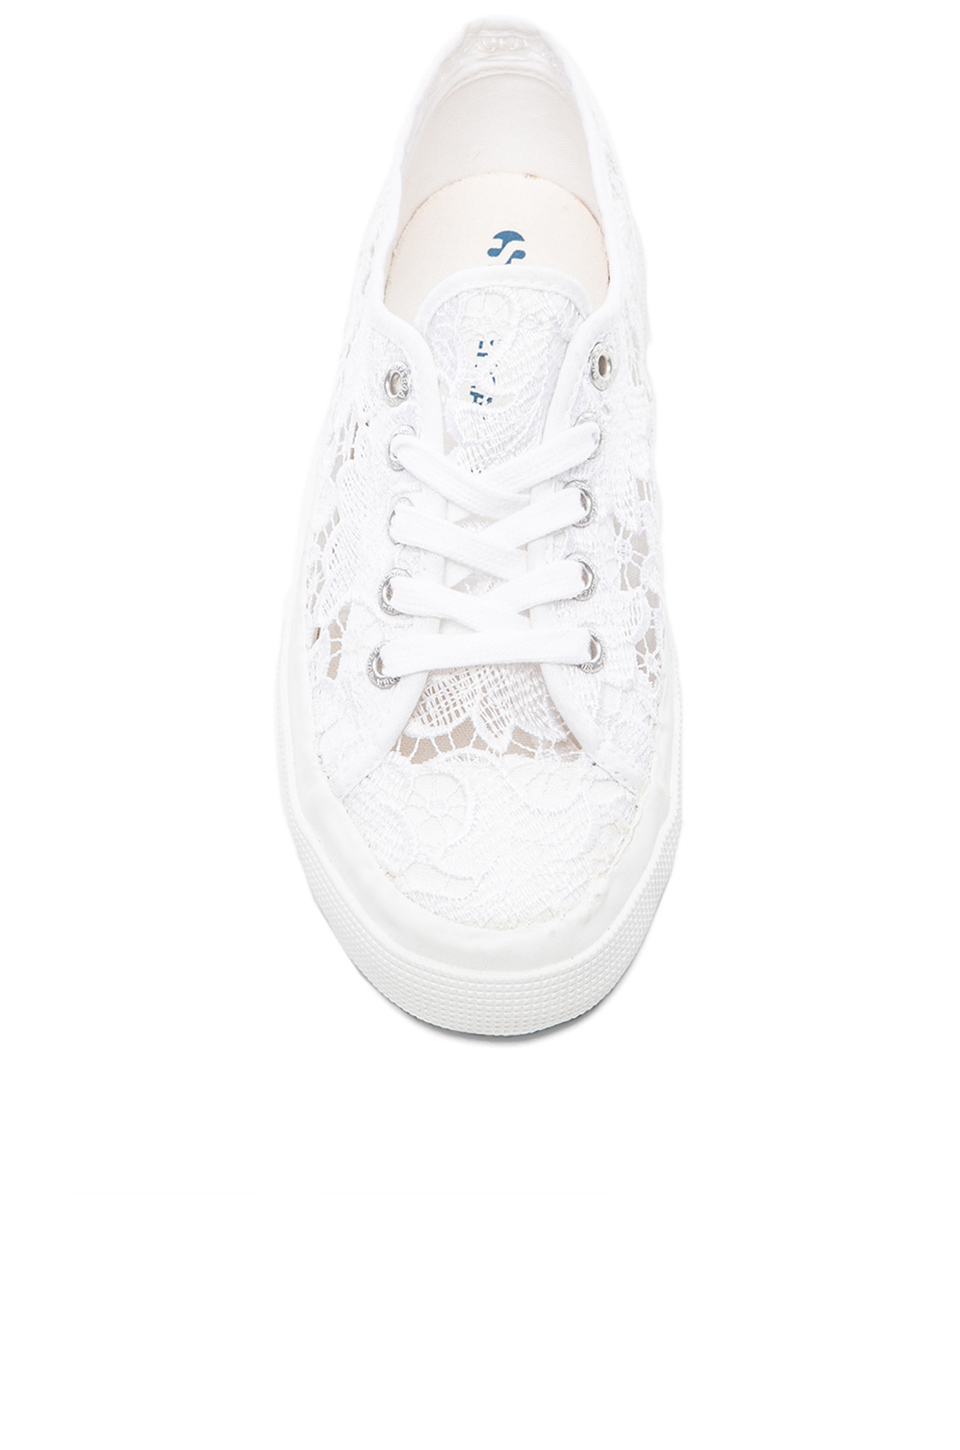 superga-white-lace-sneakers-product-0-536740434-normal.jpeg